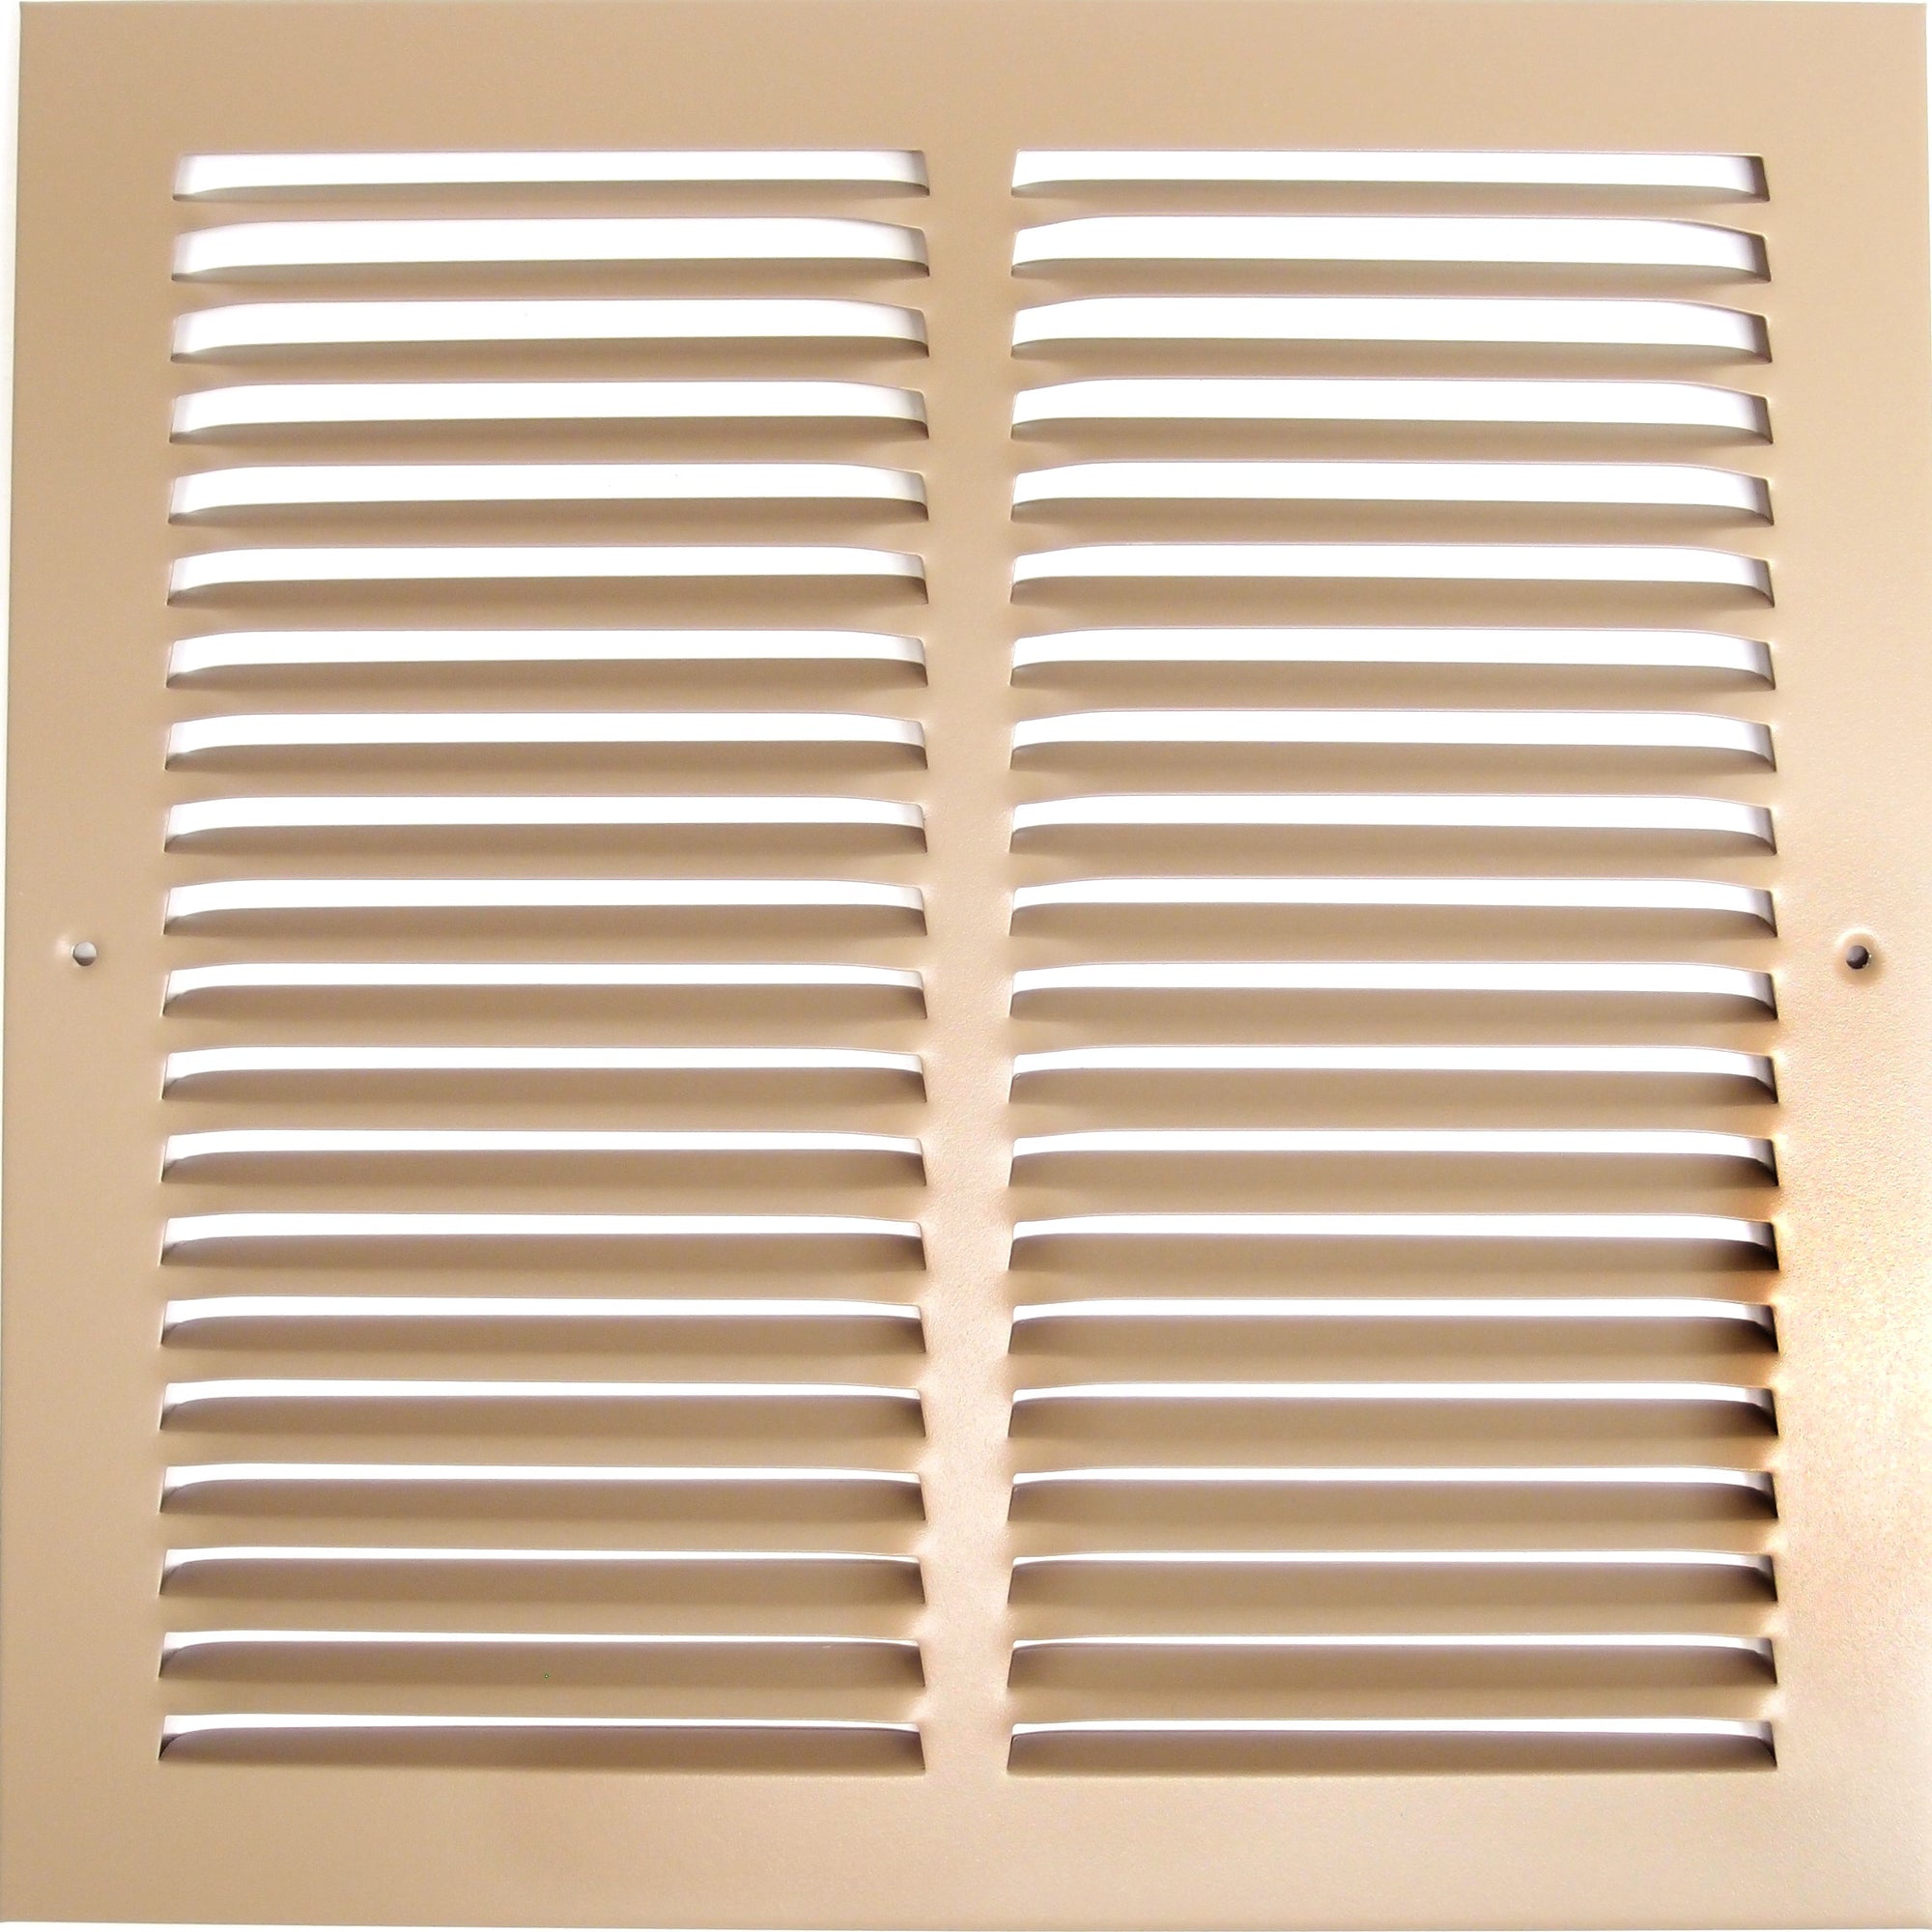 30" X 30" Air Vent Return Grilles - Sidewall and Ceiling - Steel